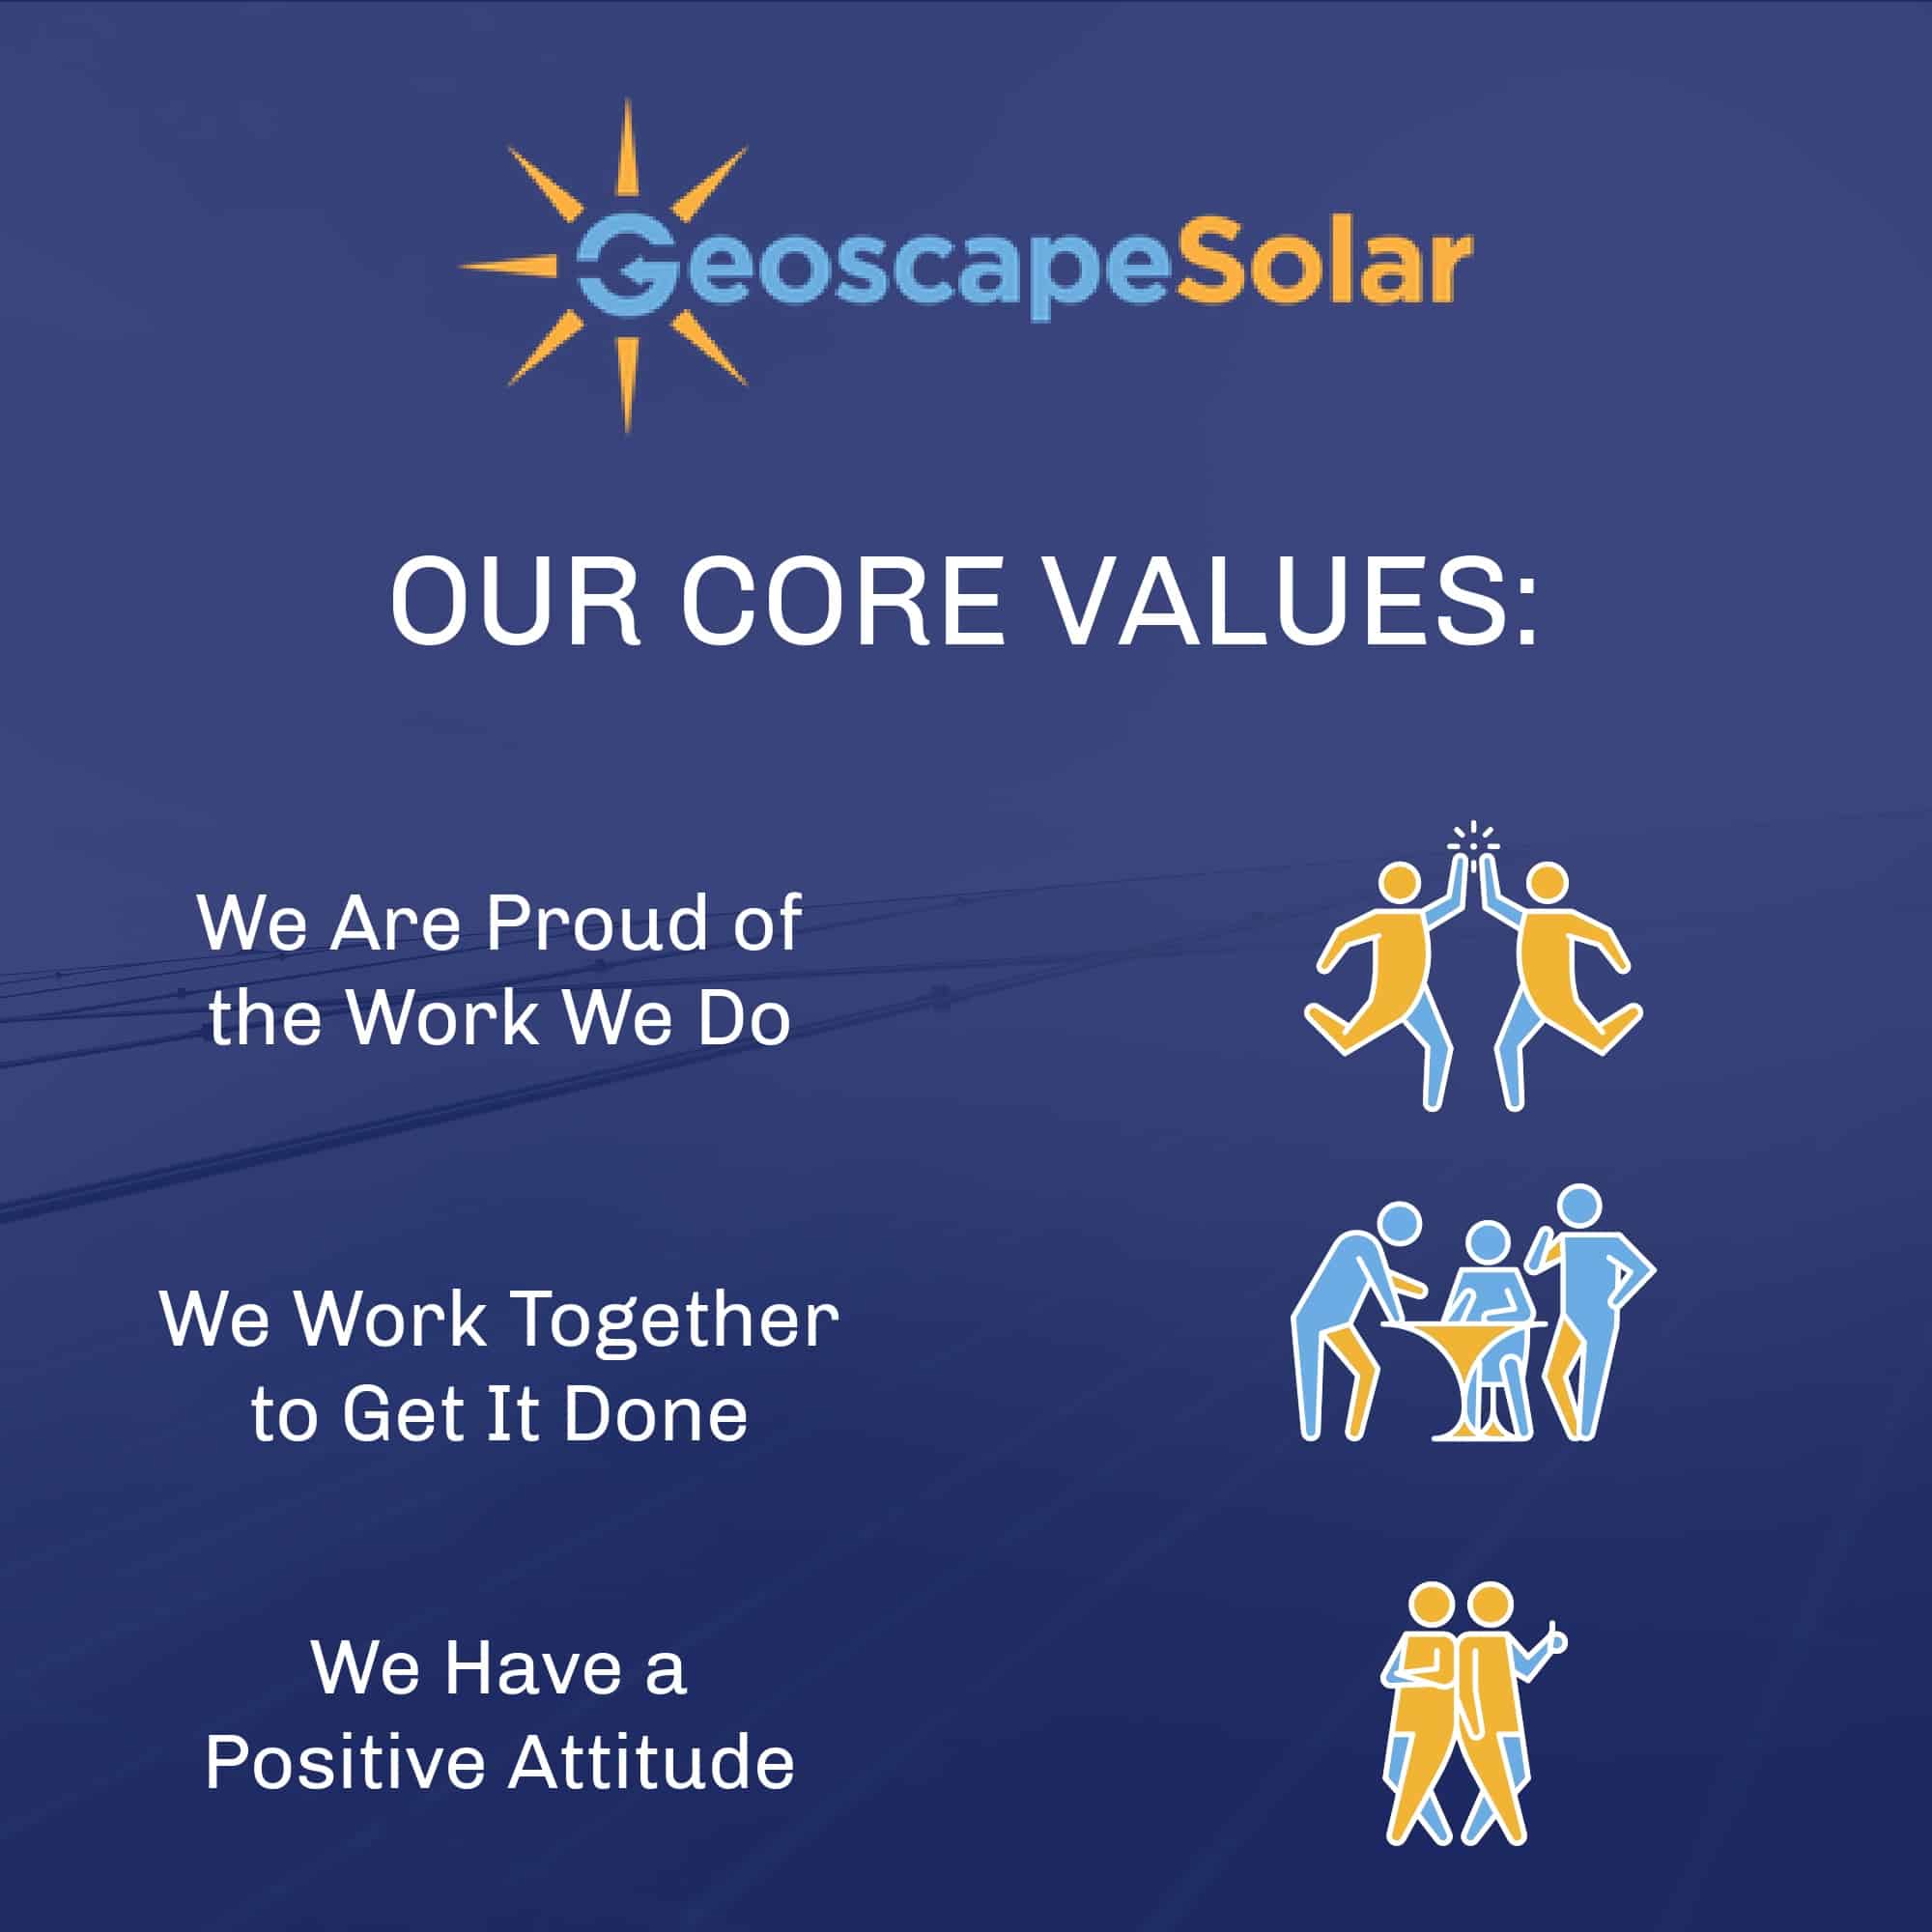 Designed from the ground up to be a leader in the solar industry.